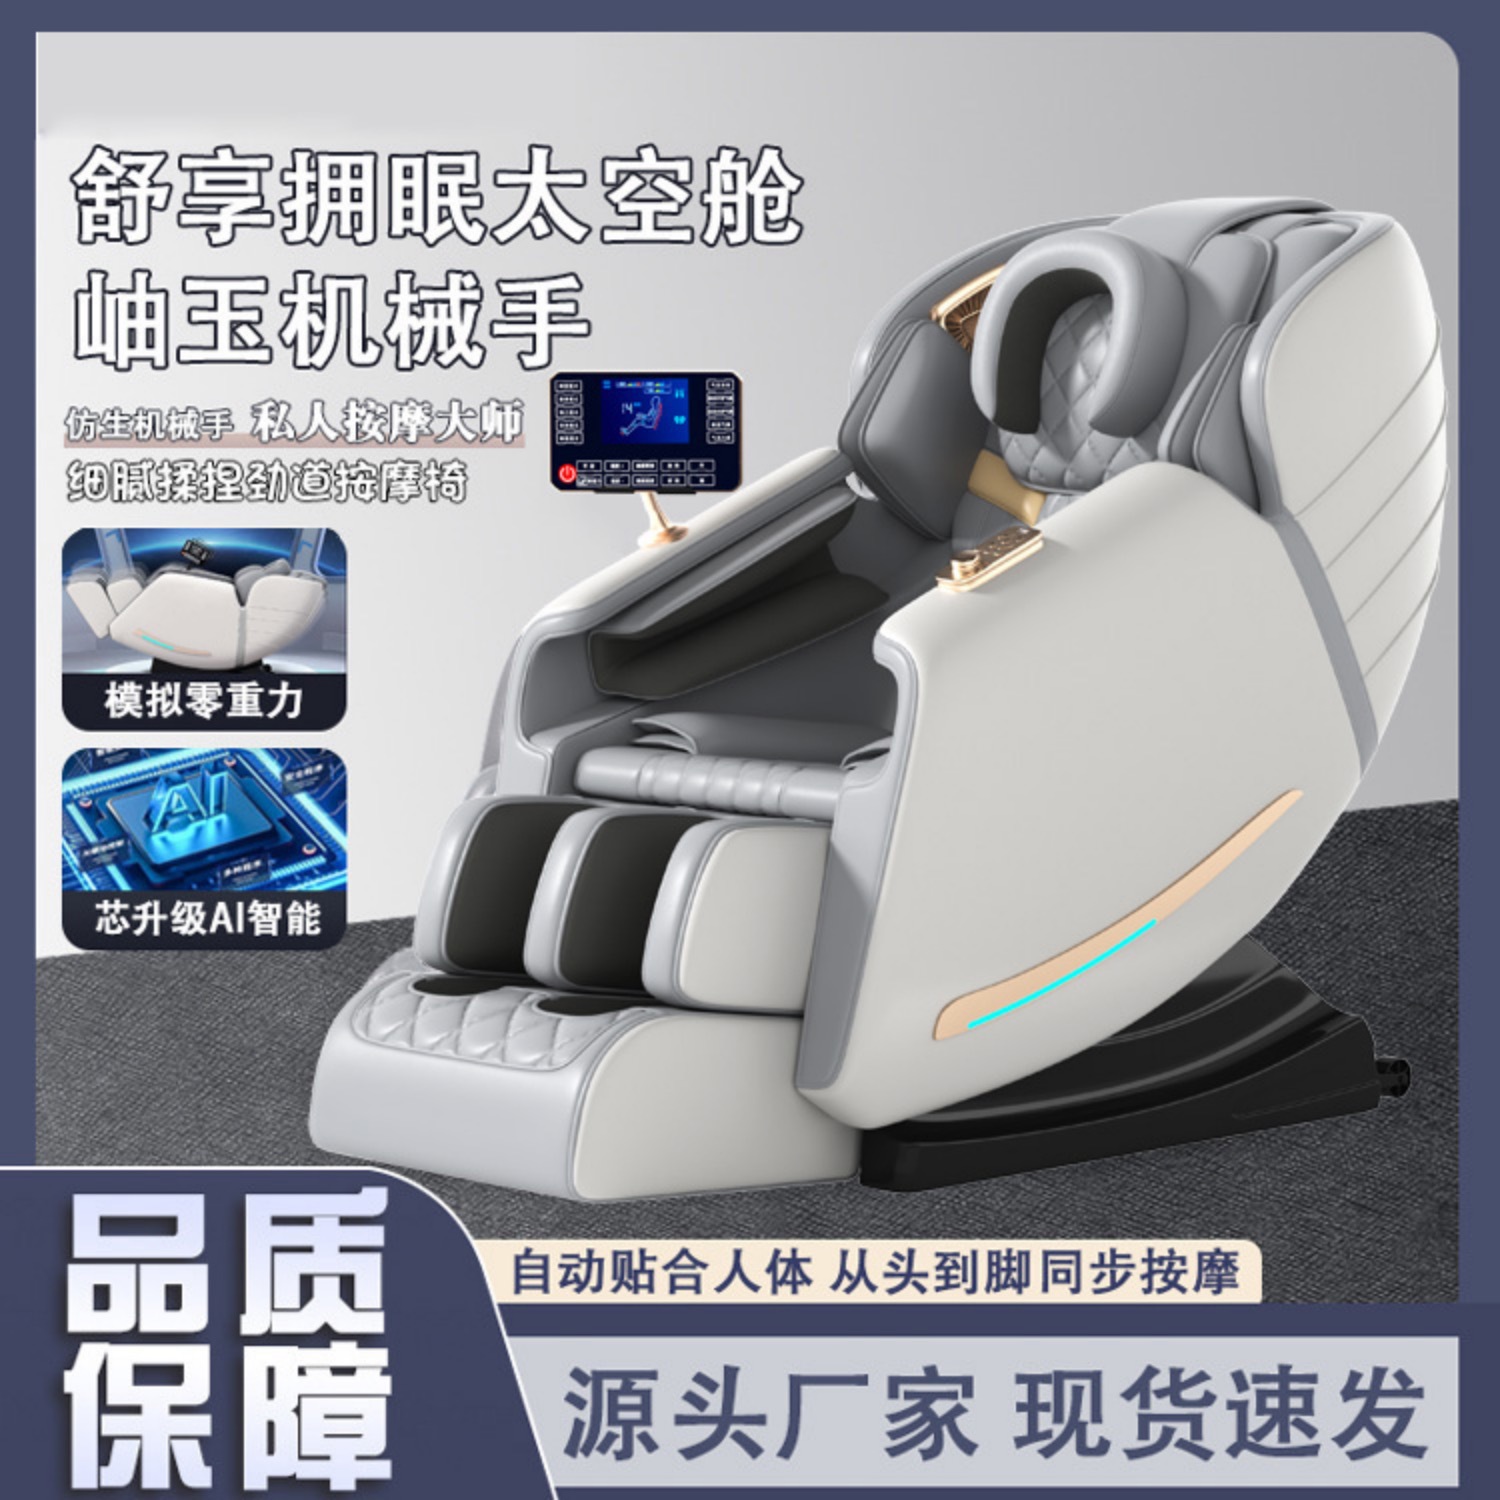 New Baizhaoxiang SL Double Guide Rail Home Full-Automatic Luxury Space Capsule Multi-Functional Smart Massage Chair